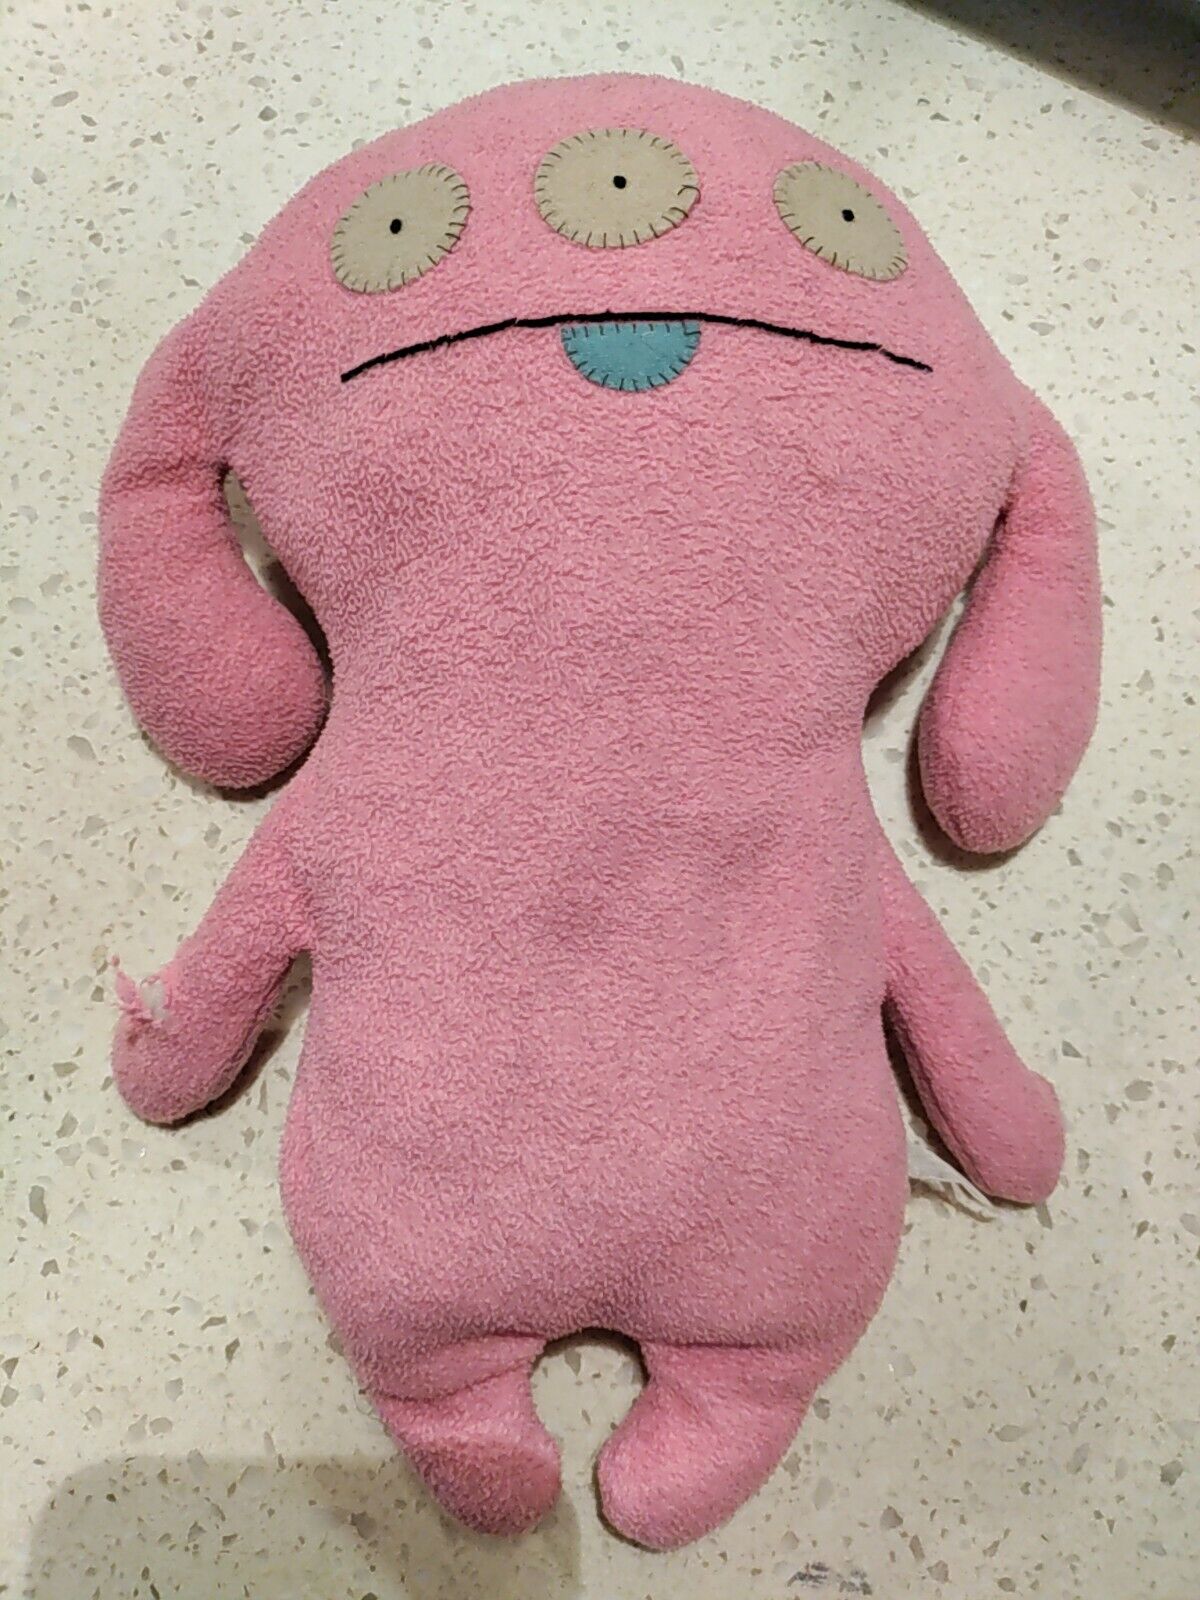 Ugly Doll Peaco 14” Pink Collectible Plush Toy Pretty Ugly Llc Vintage 2004